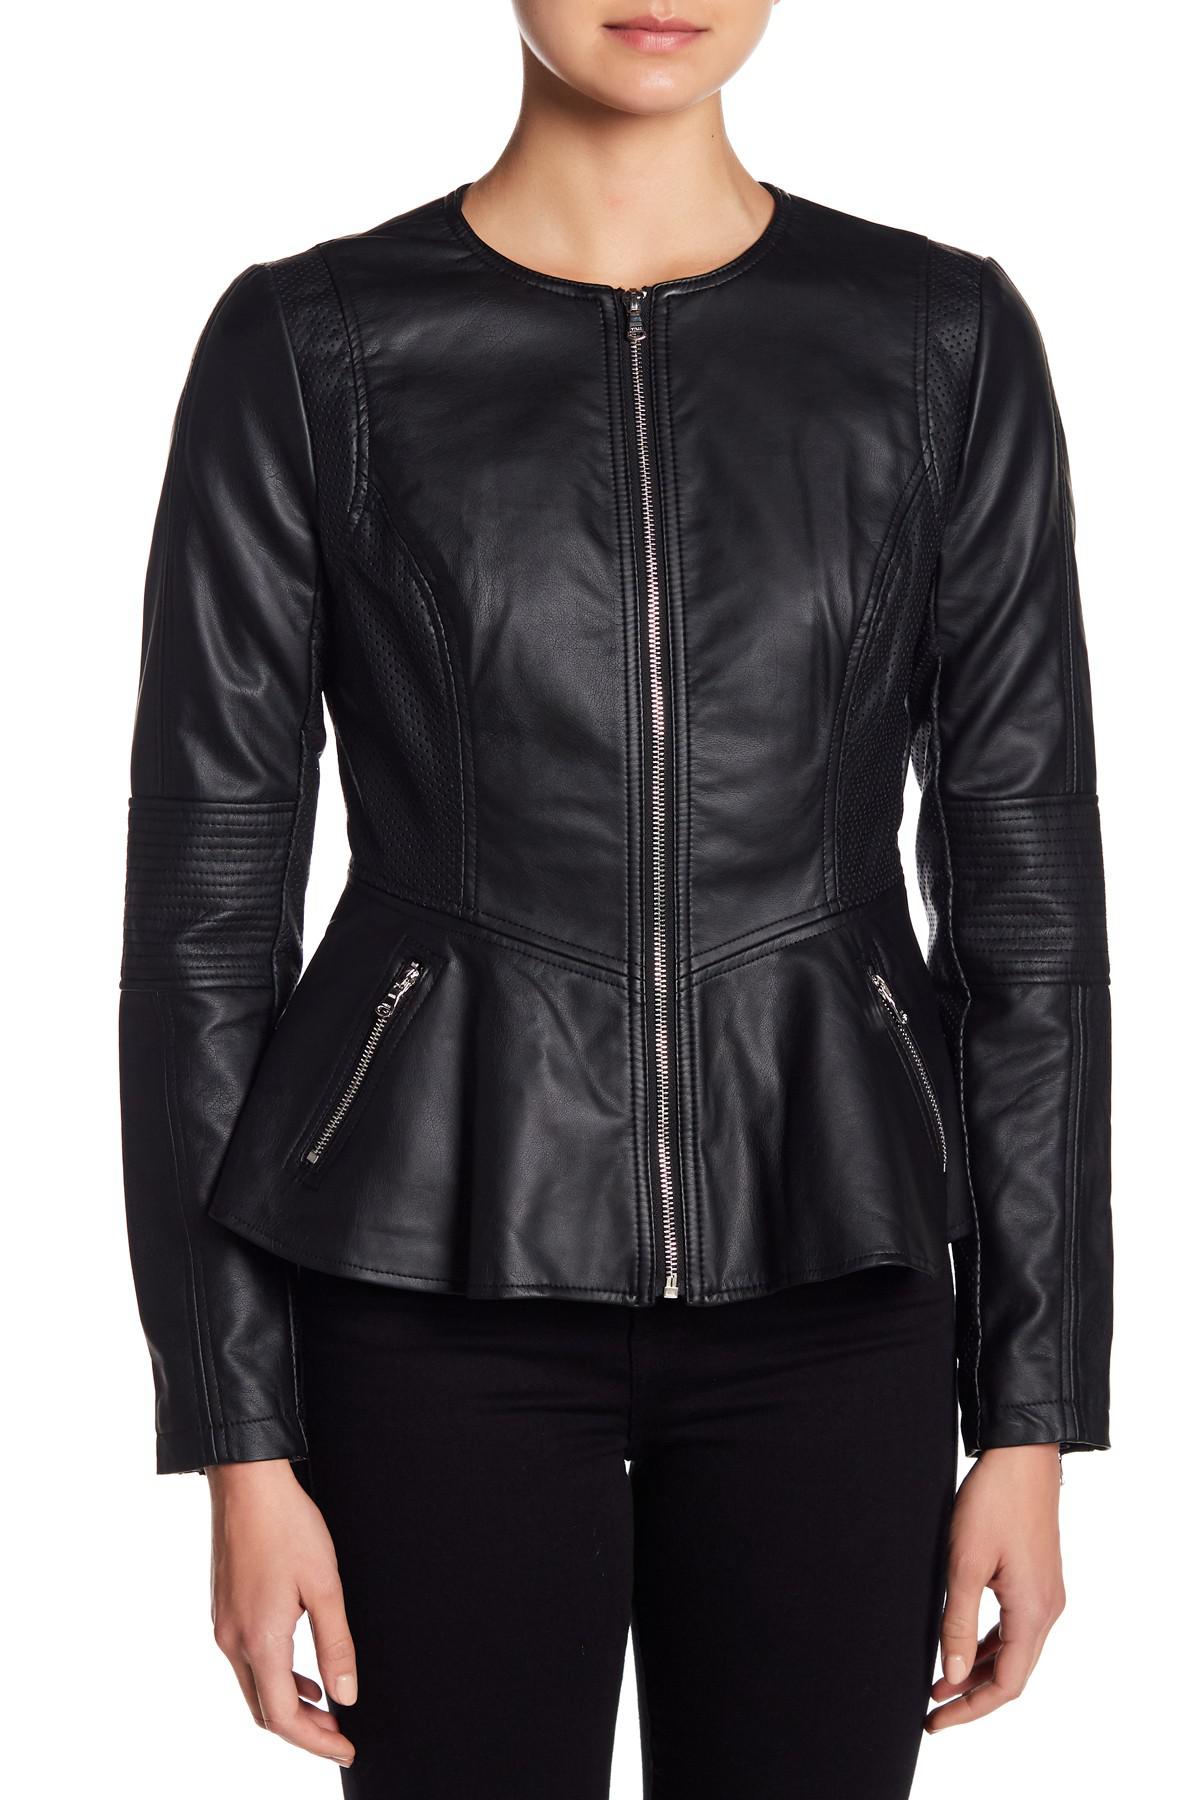 Guess Peplum Faux Leather Jacket in Black | Lyst